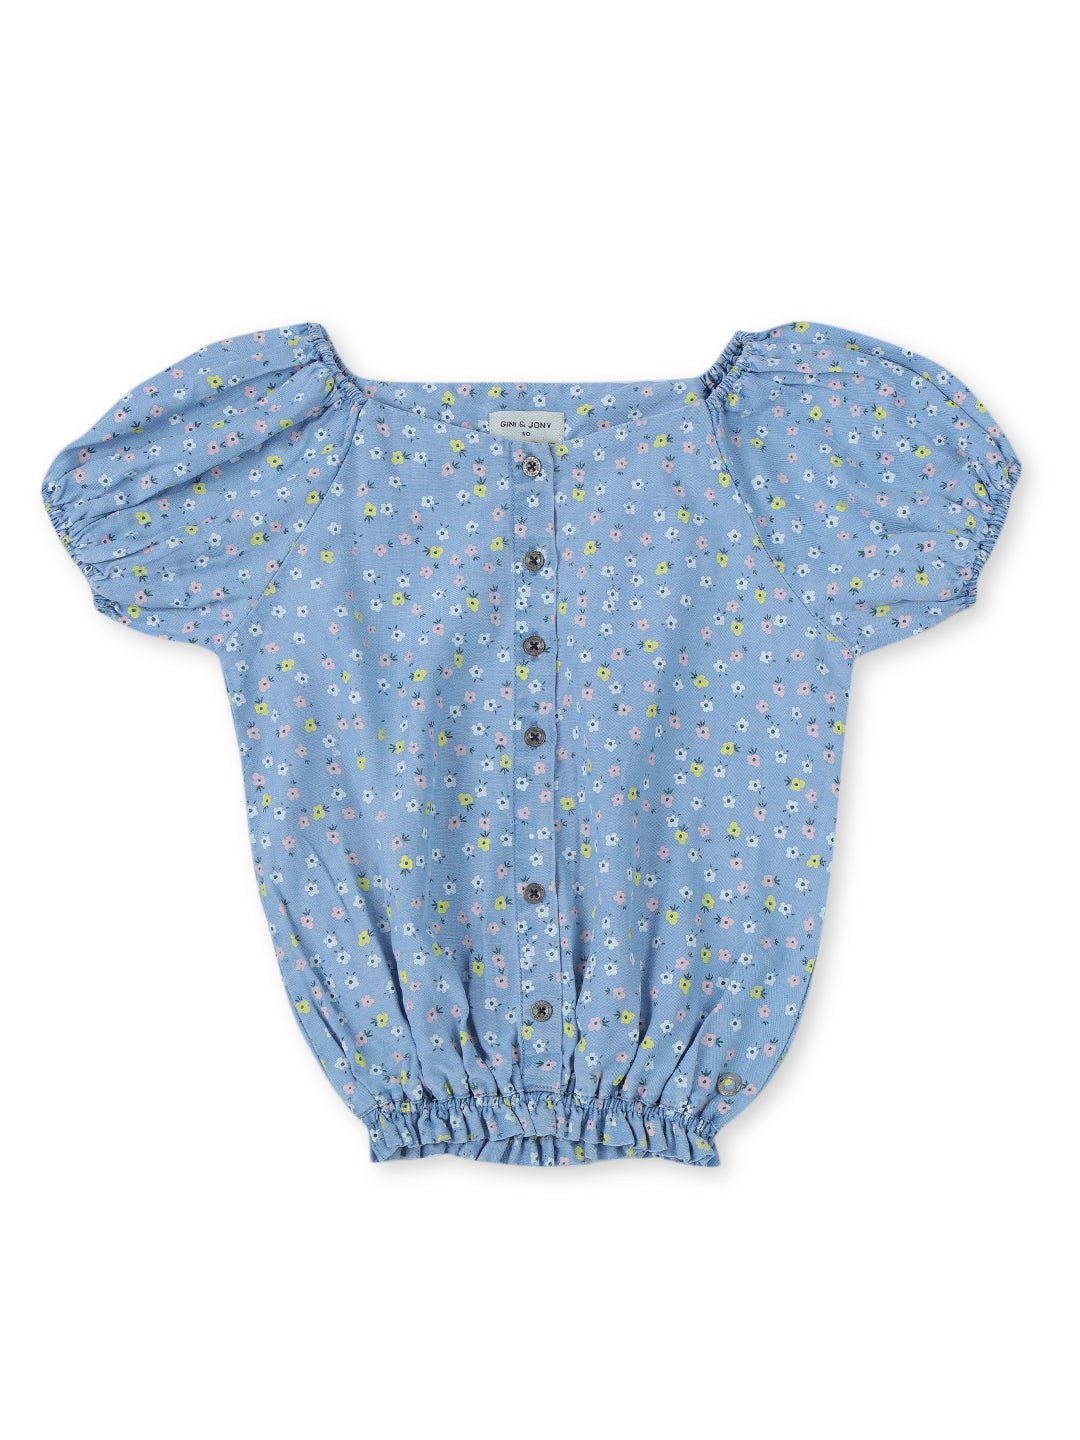 Girls Blue Cotton Printed Woven Top